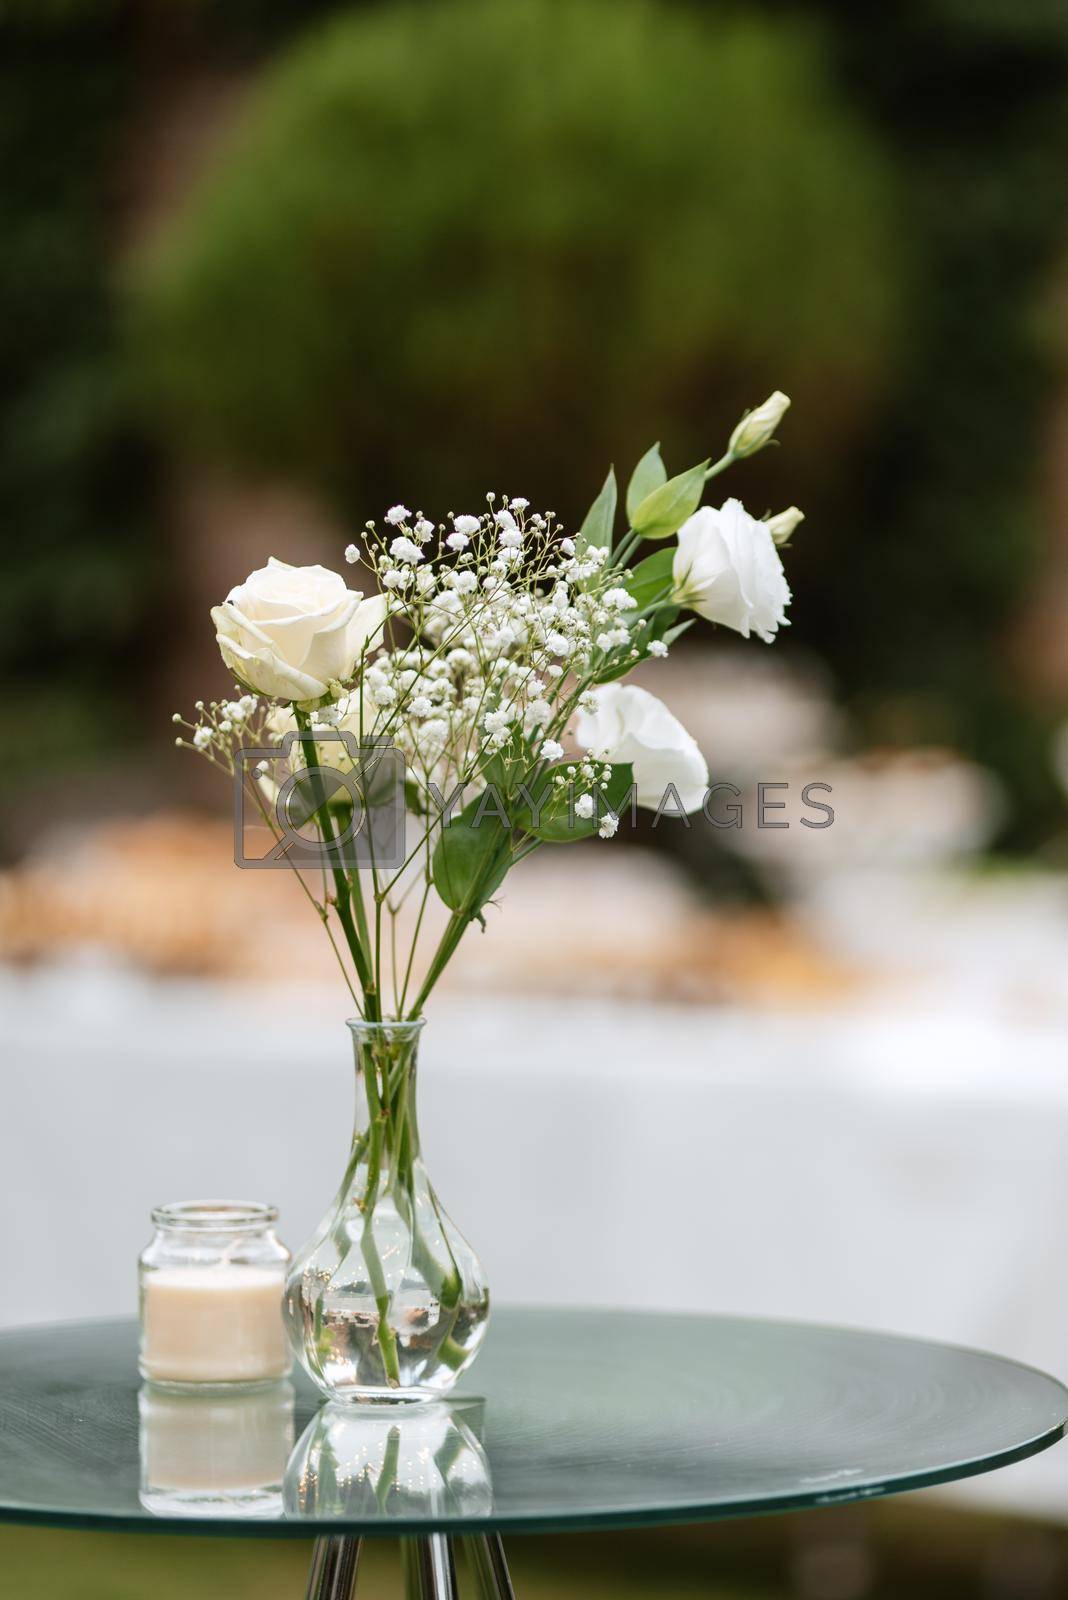 Royalty free image of wedding decor with natural flowers by Andreua